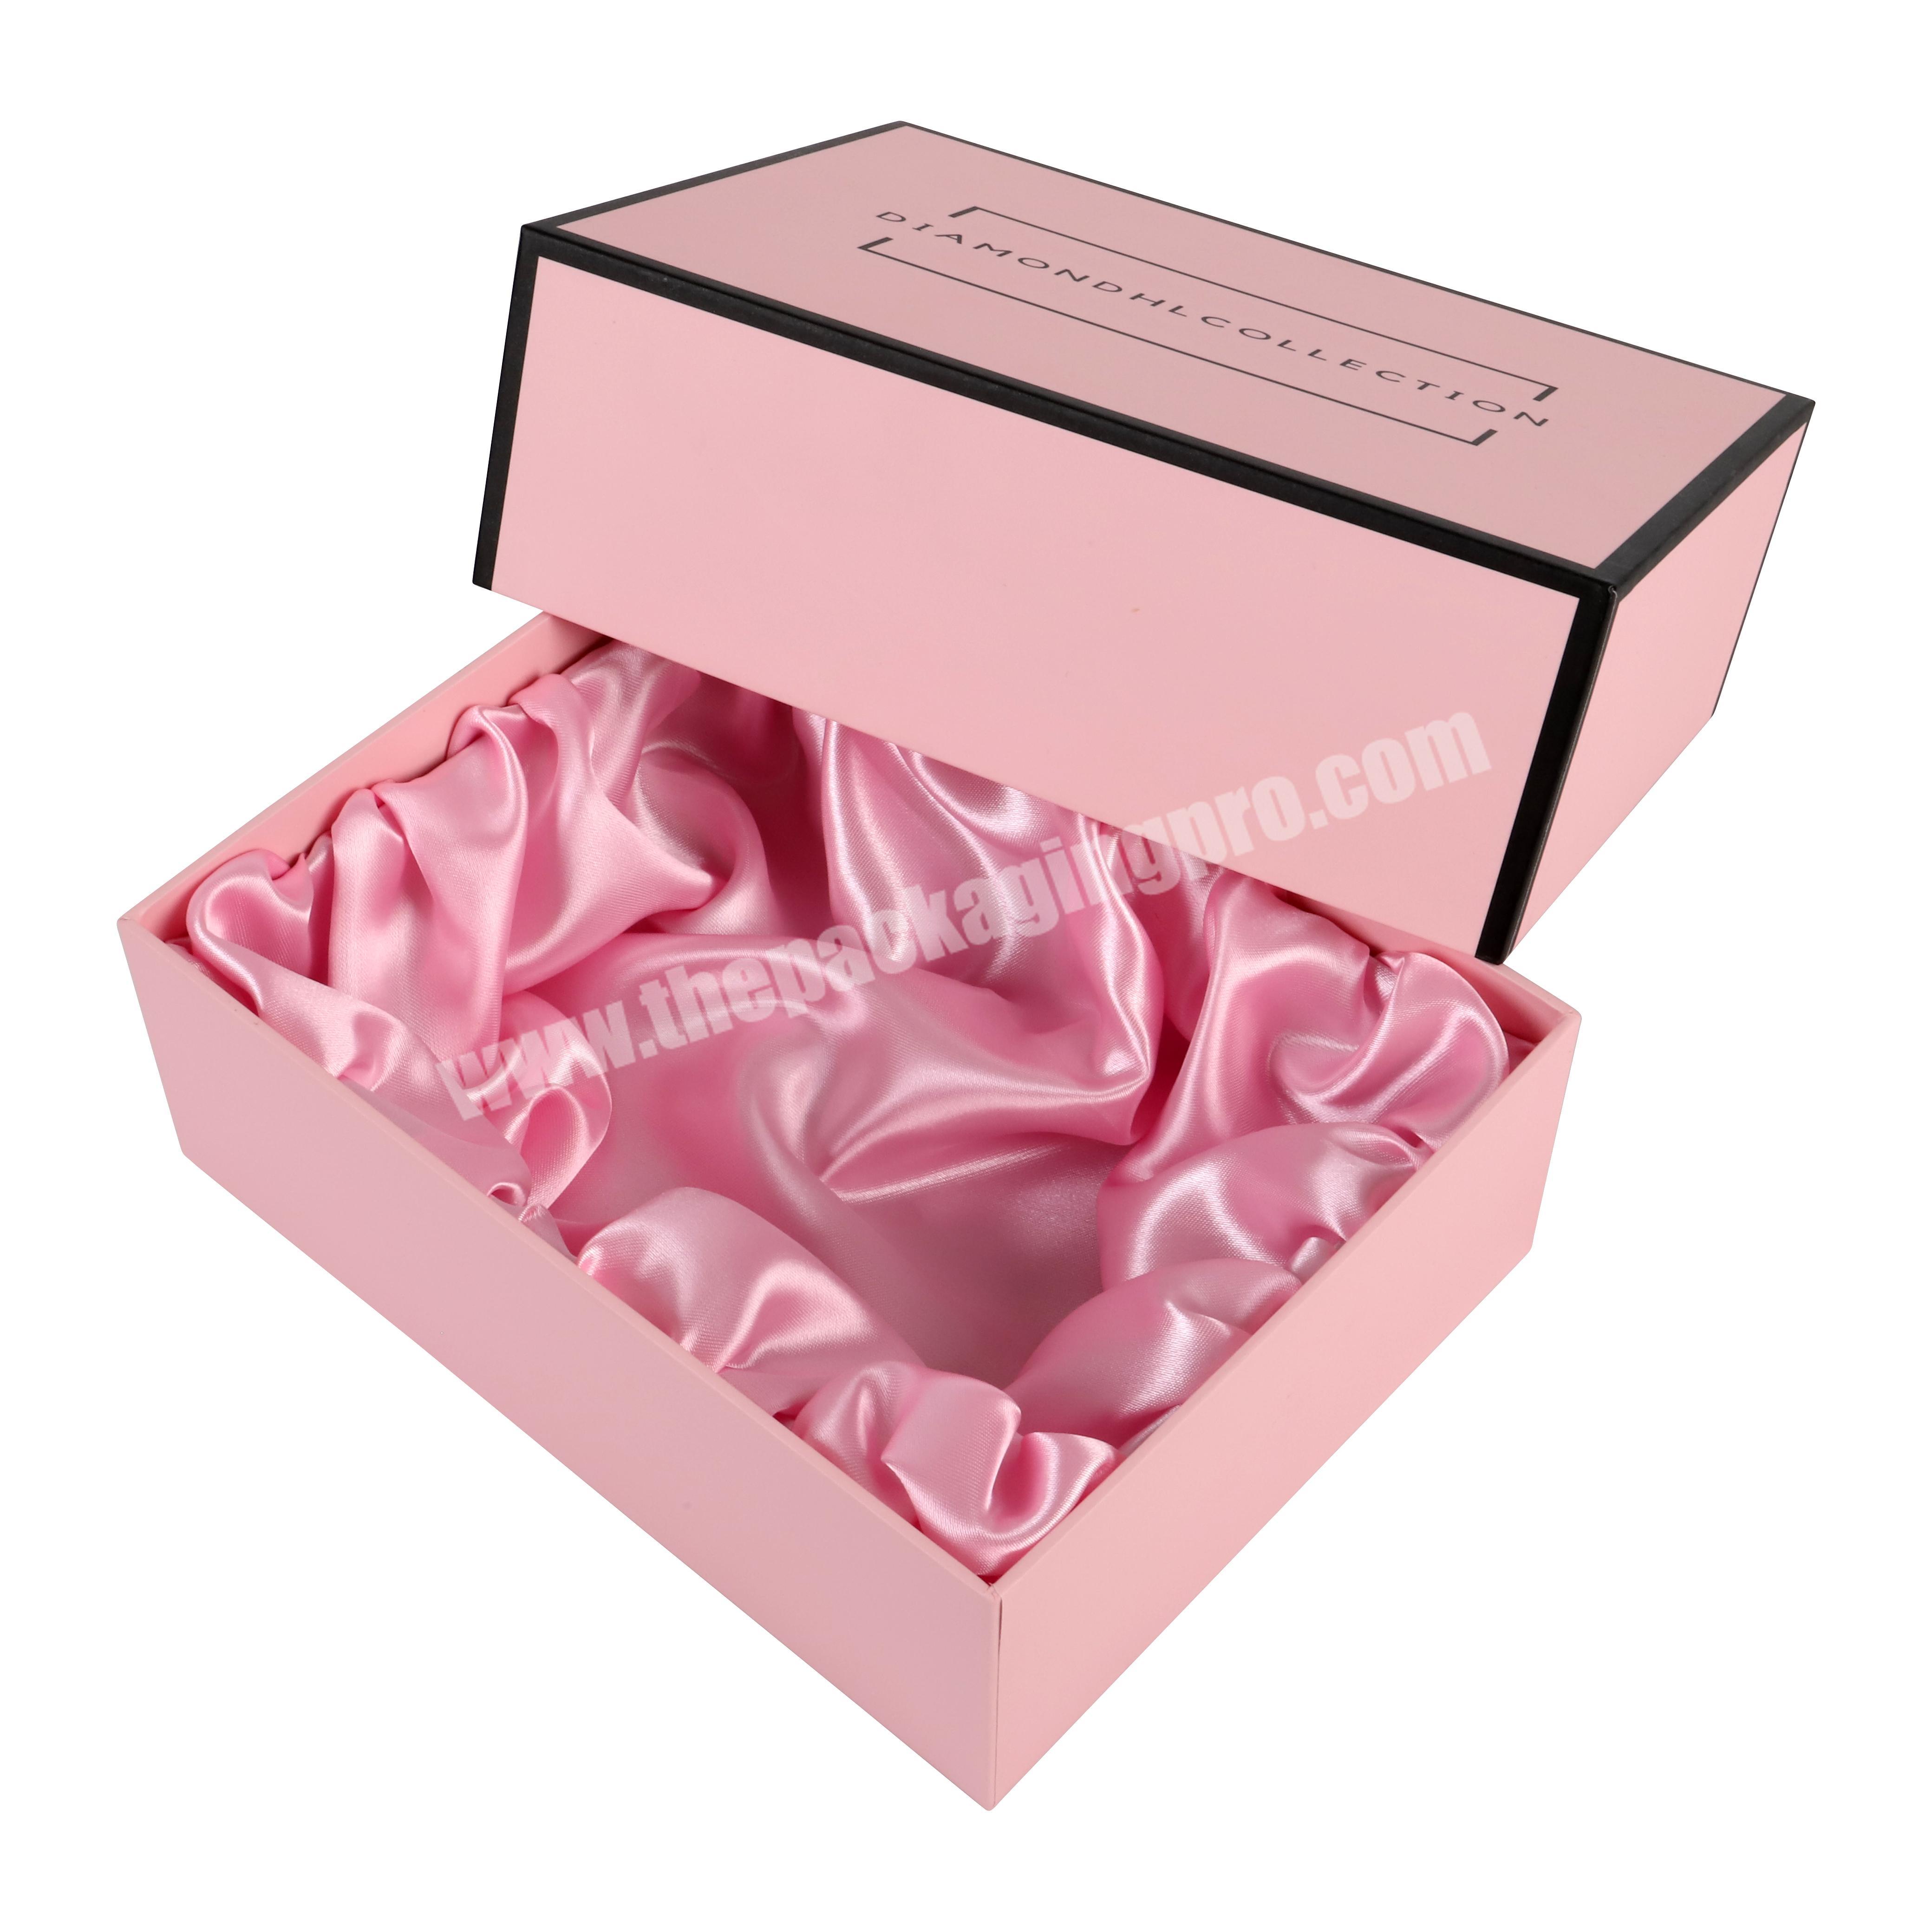 Custom Handmade Hair Extension Bundle Packaging Gift Box With Satin Lining